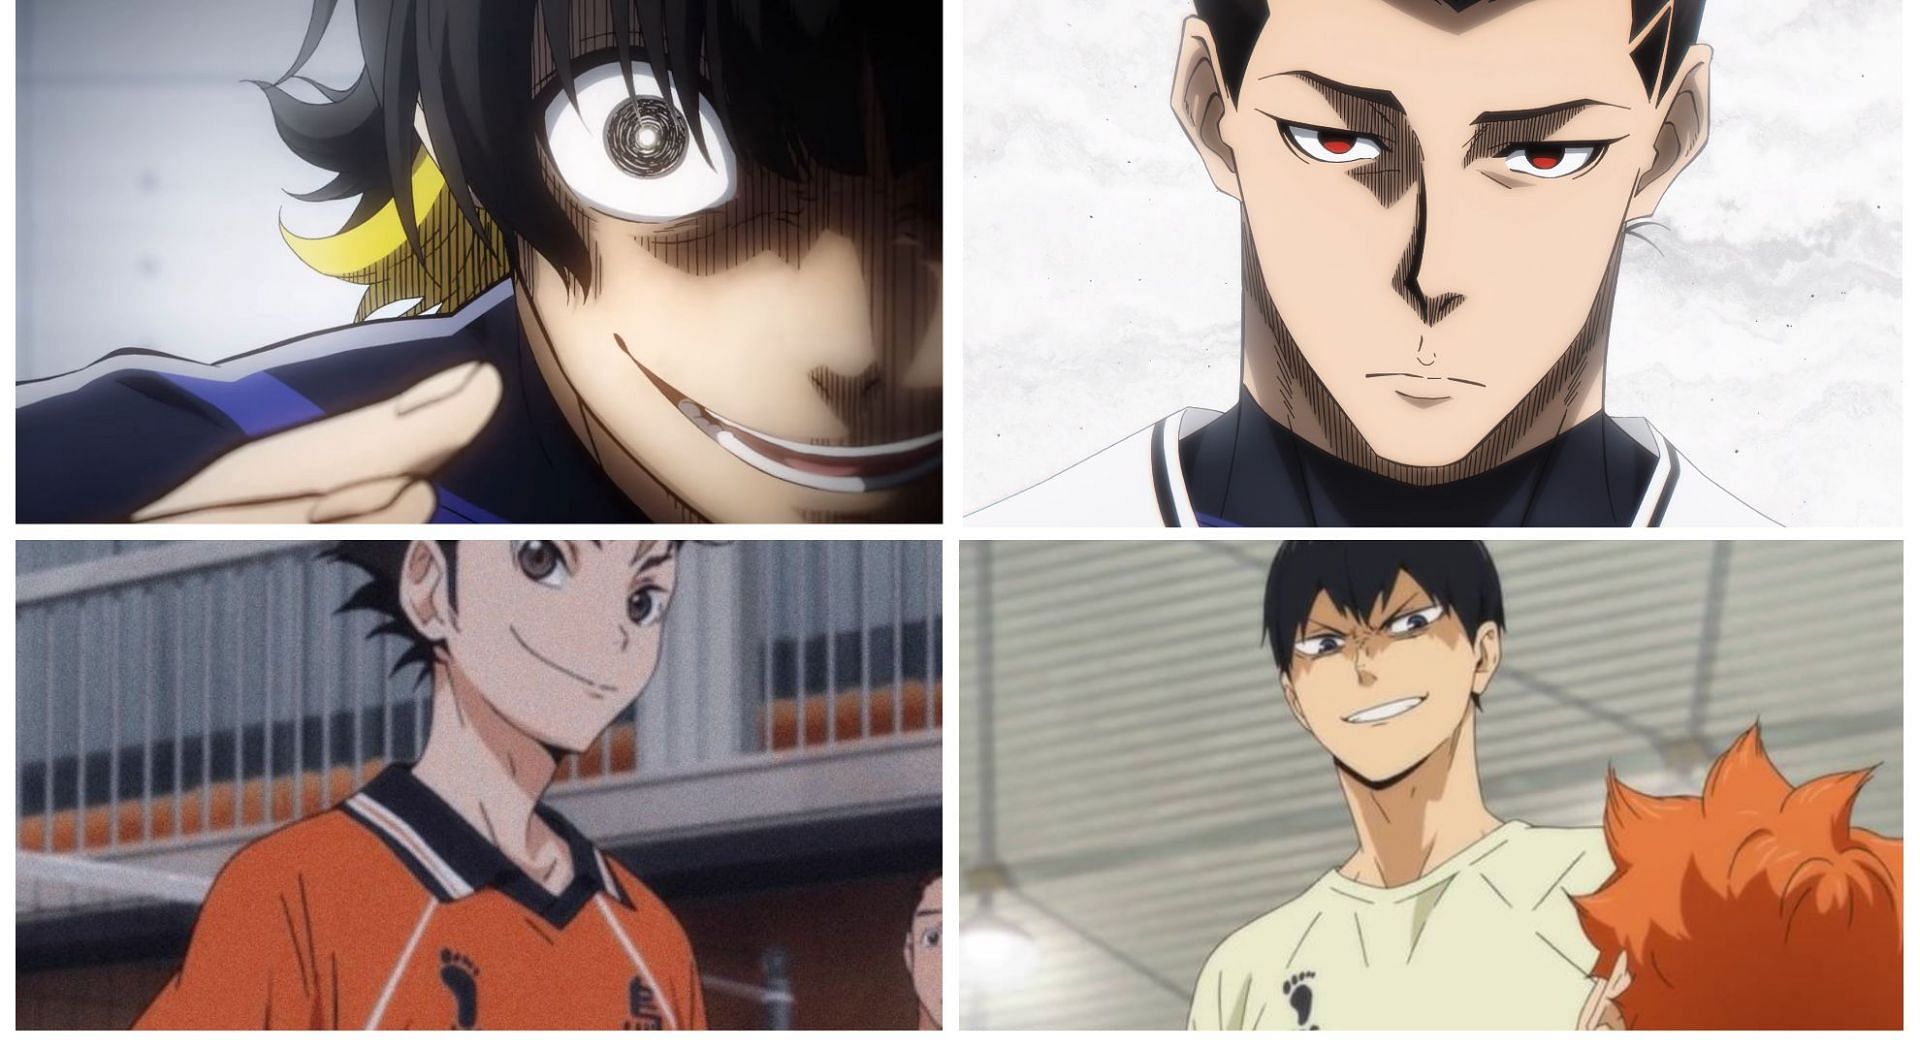 Blue Lock: 10 pairs of Blue Lock and Haikyuu characters who have